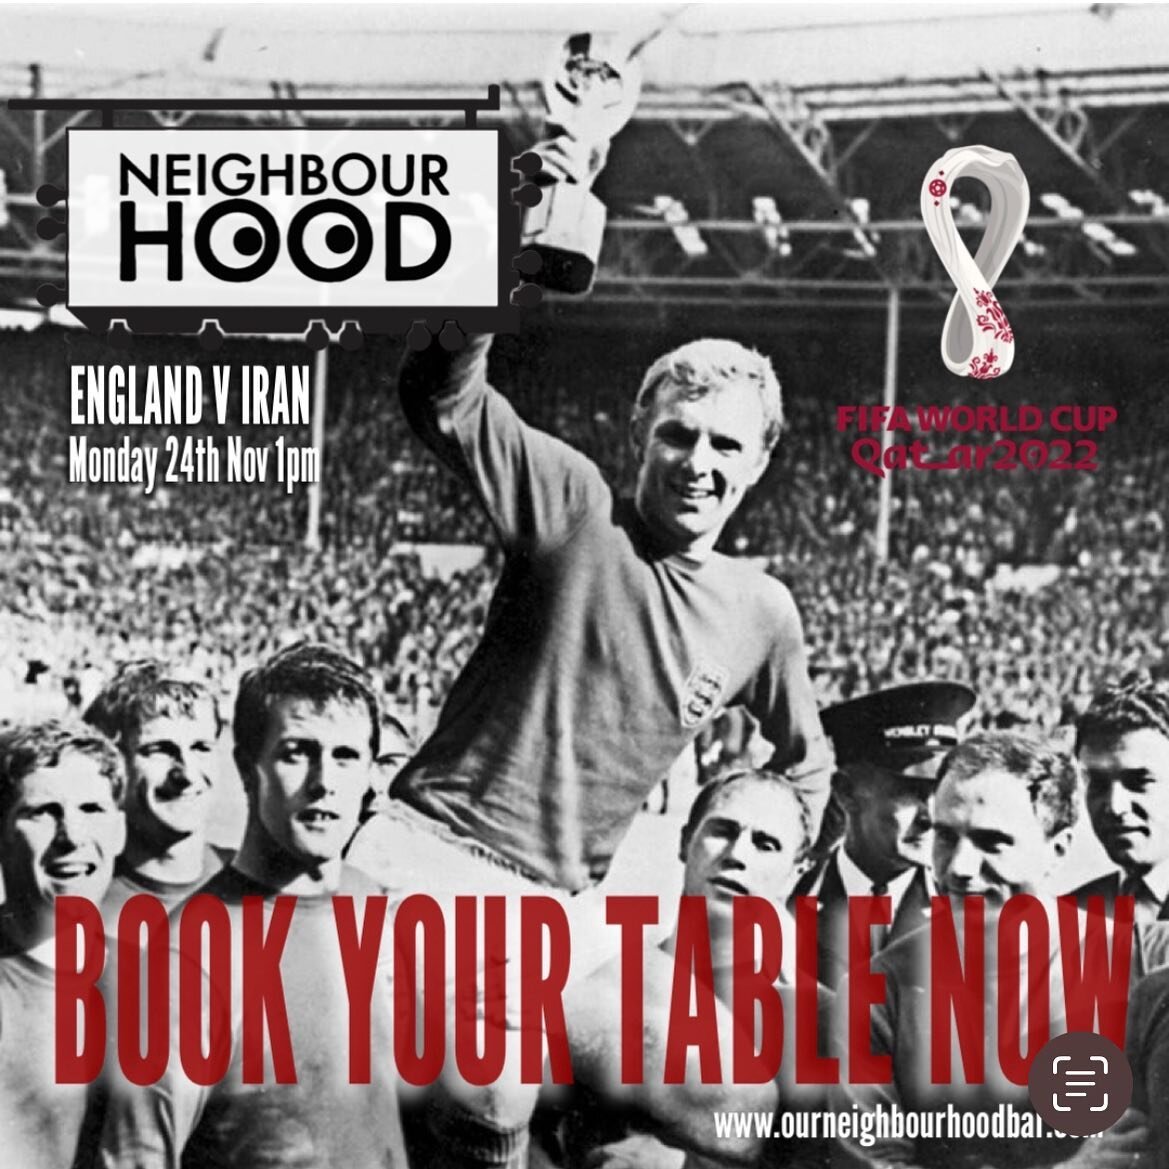 ENGLAND V IRAN this Monday at 1pm, if you want a nice cozy seat with tasty pizza and even tastier beer then get on the website and get it booked www.ourneighbourhoodbar.com ⚽️🍕🍺